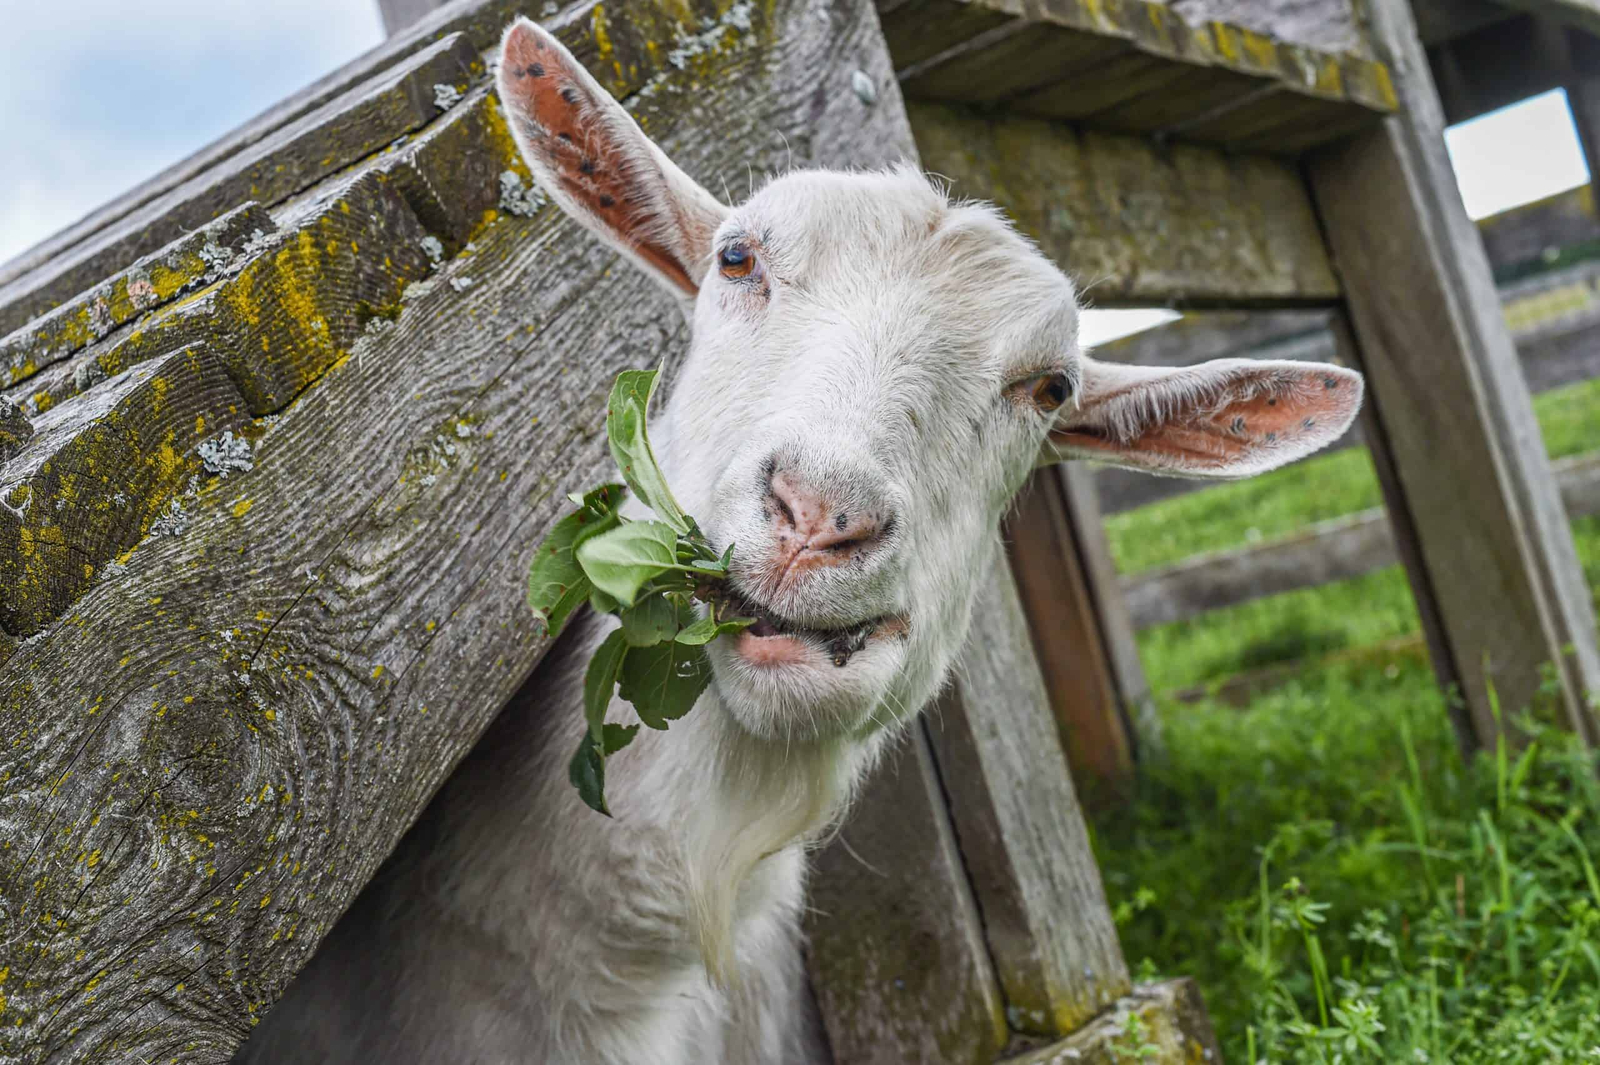 Effective Strategies for Weight Loss in Goats